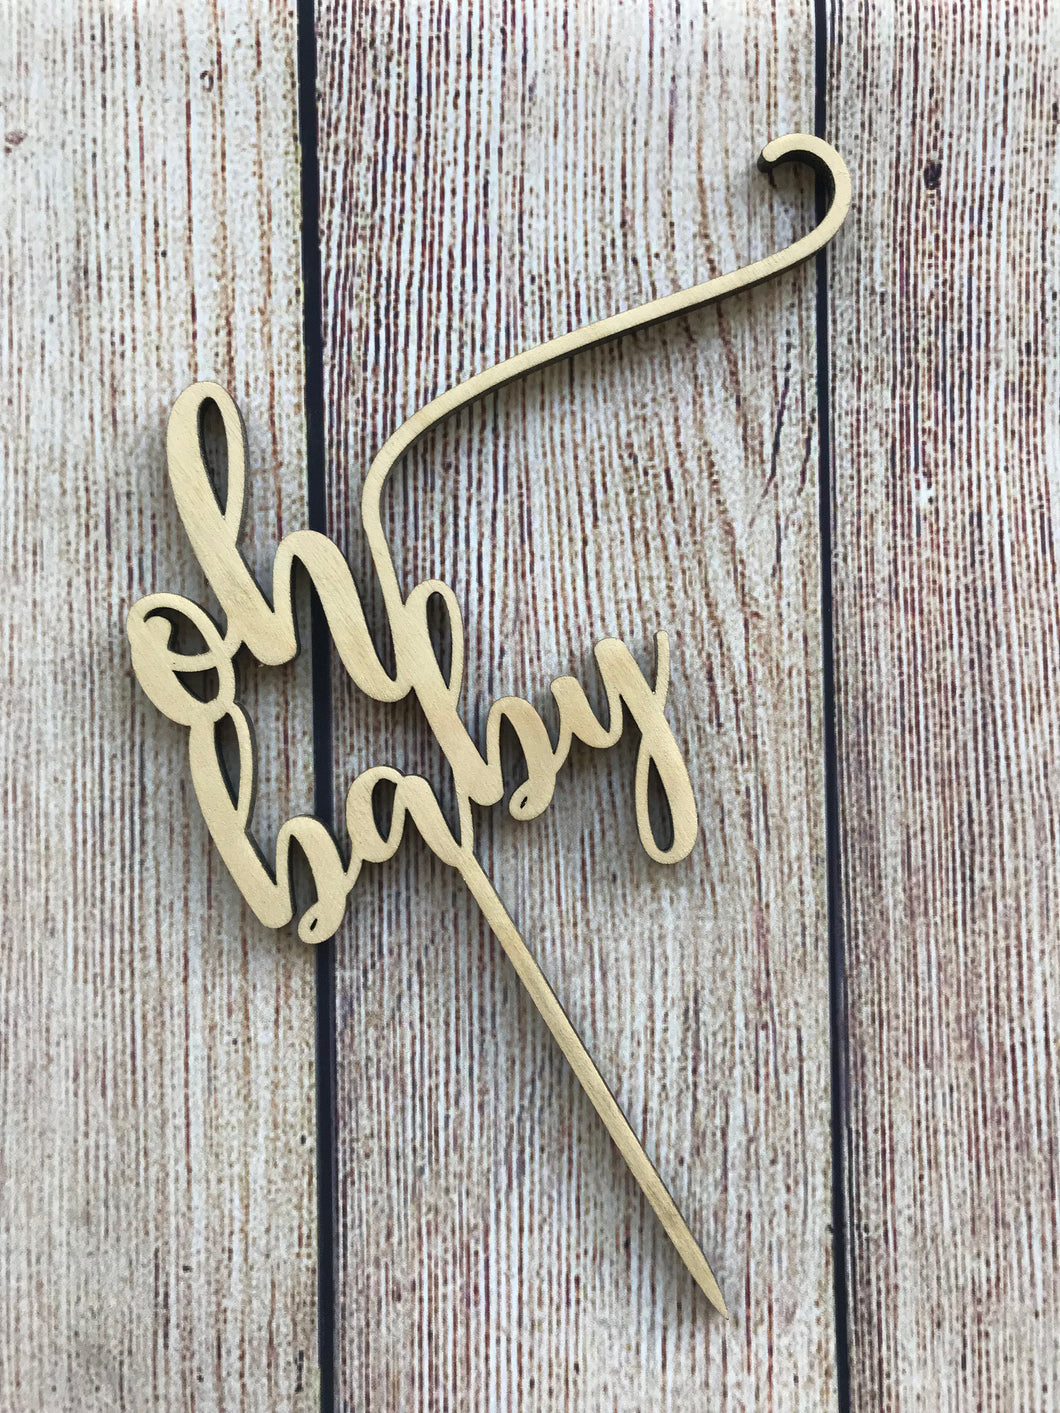 Oh Baby Baby Shower Cake Topper